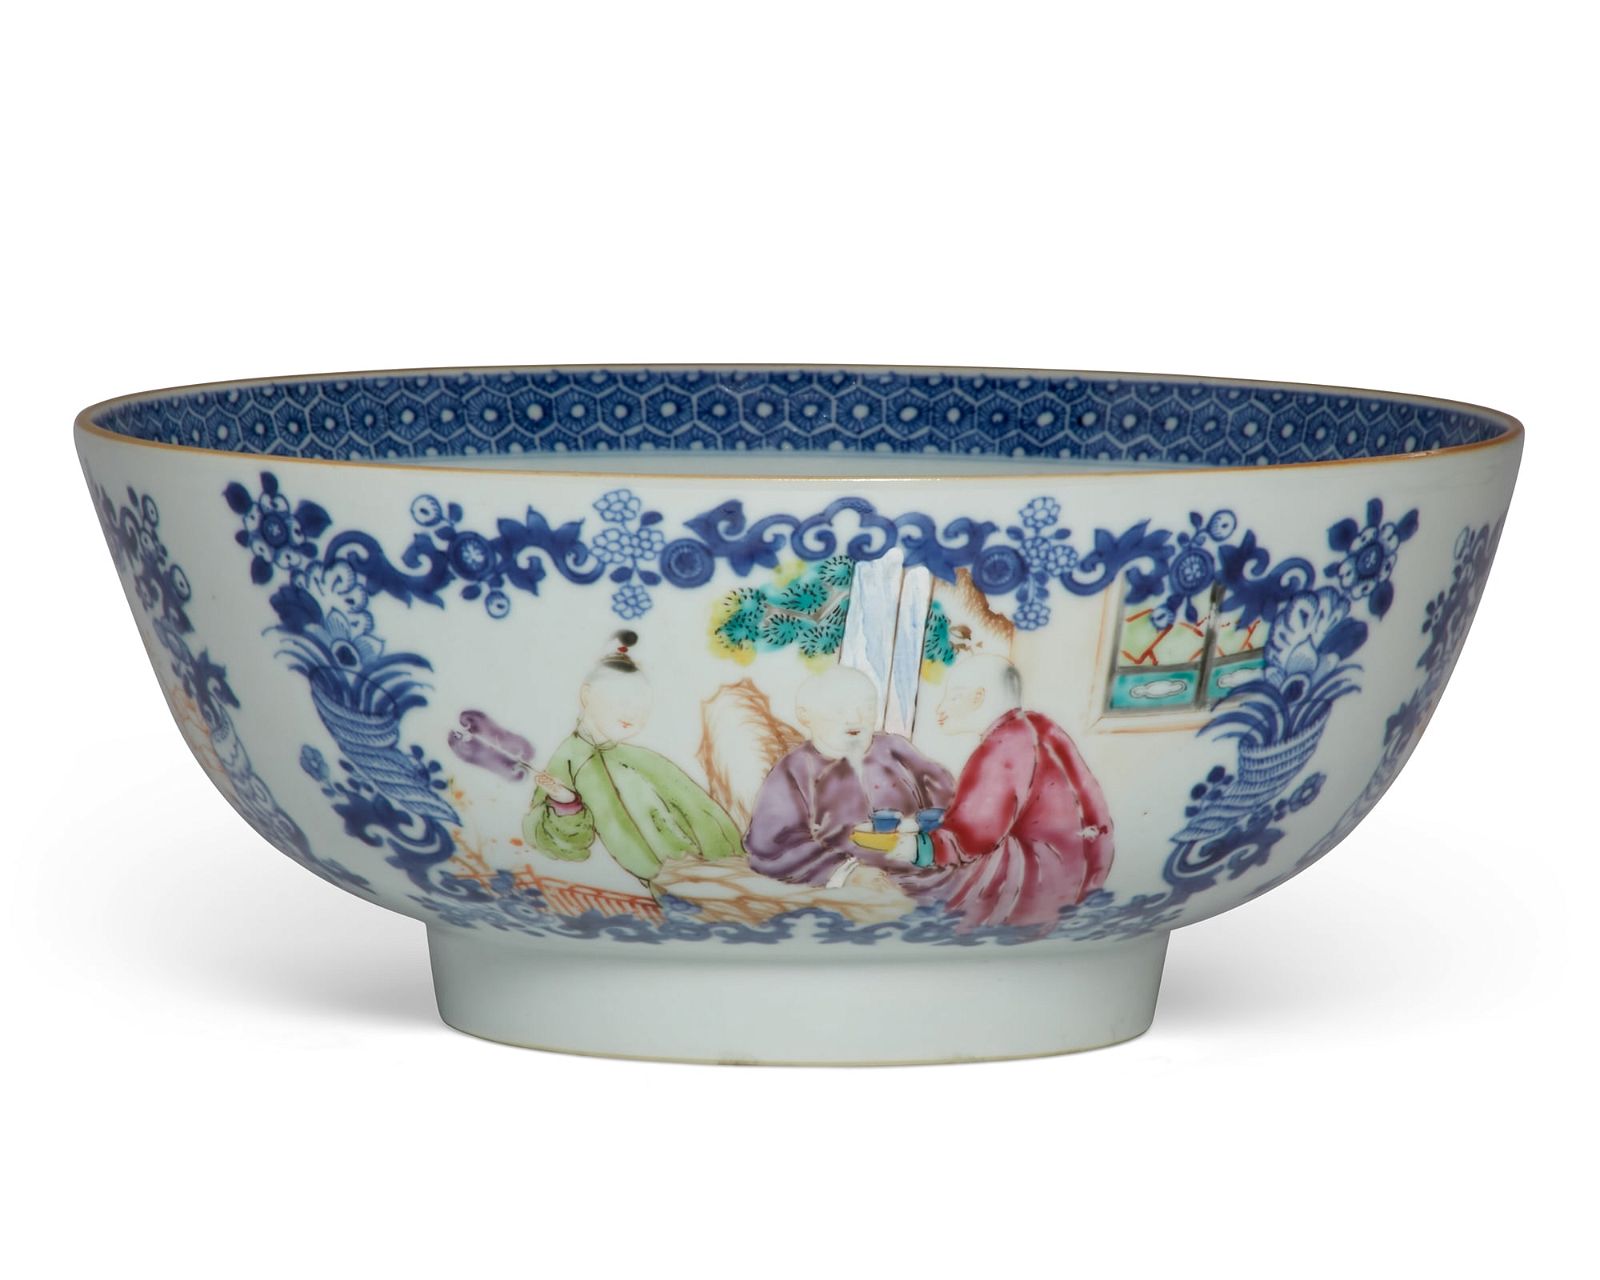 A CHINESE EXPORT ENAMELED PORCELAIN 2fb3b35